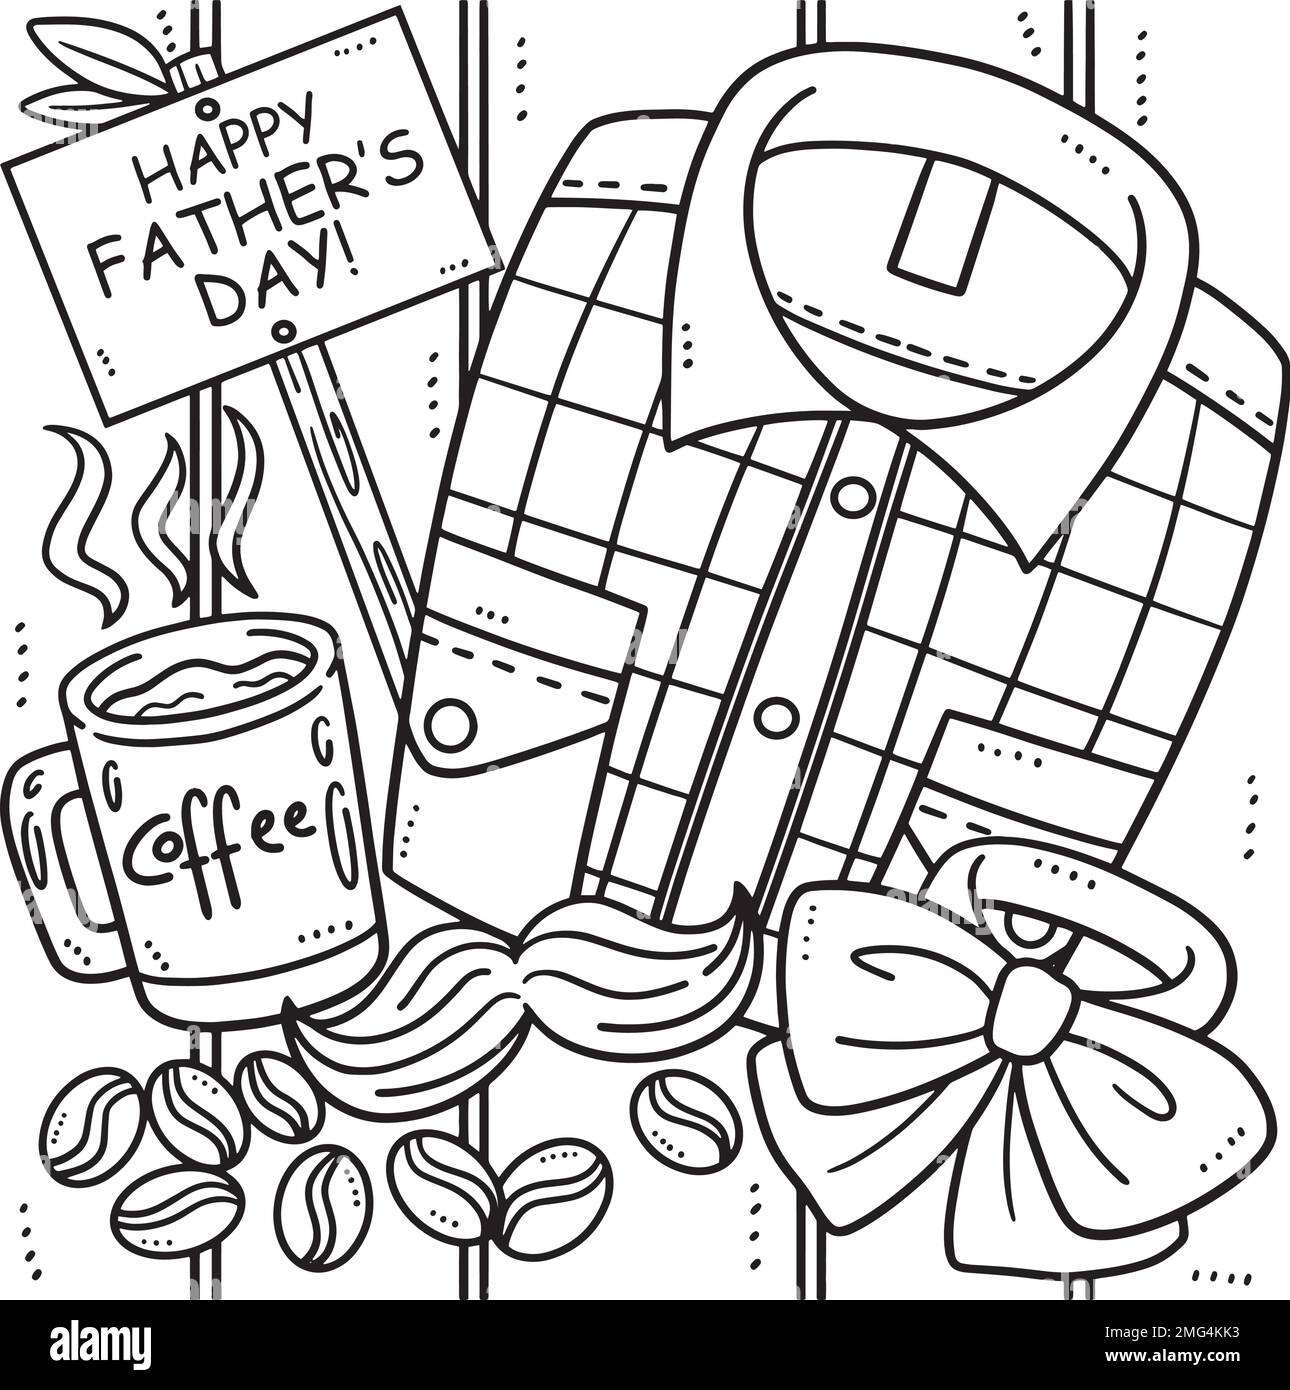 10 Easy Father's Day Drawing For Kids That Make The Perfect Gift-saigonsouth.com.vn